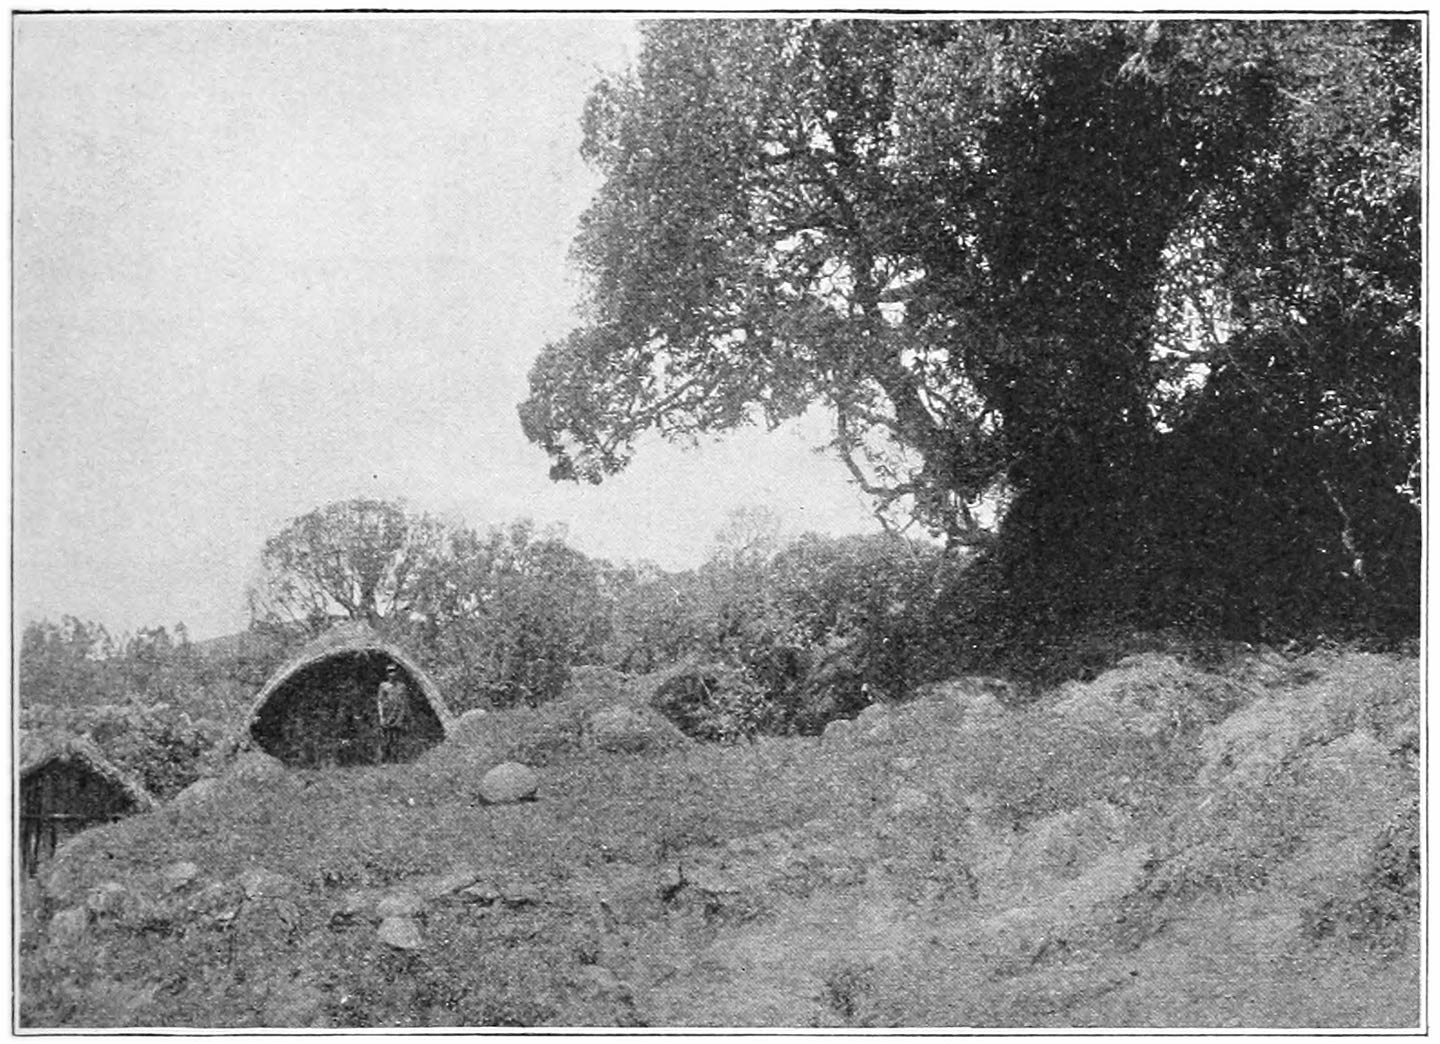 FIG. 24.—THE ‘KUGVALI’ OF TARADR. ON ITS LEFT IS THE ‘KWOTARS,’ AND ON THE EXTREME RIGHT, UNDER THE TREE, IS THE ‘KUSH.’ THE FLAT STONE TO THE RIGHT OF THE ‘KUGVALI’ IS THE ‘PÜDRSHTIKARS’ (see p. 654).